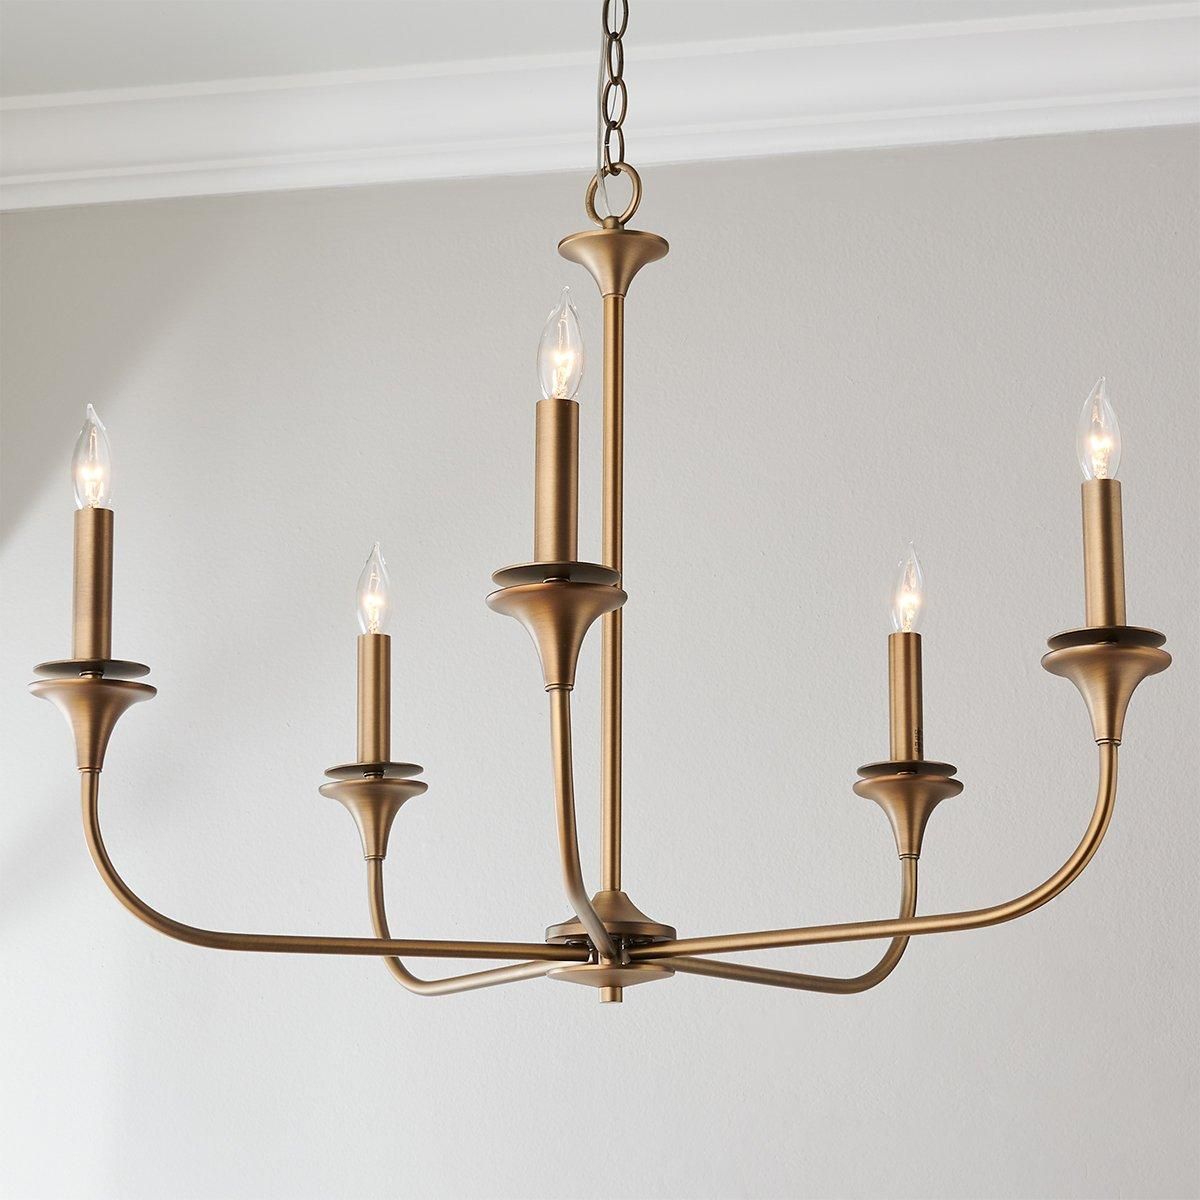 Mayhue Chandelier - 5 Light | Shades of Light